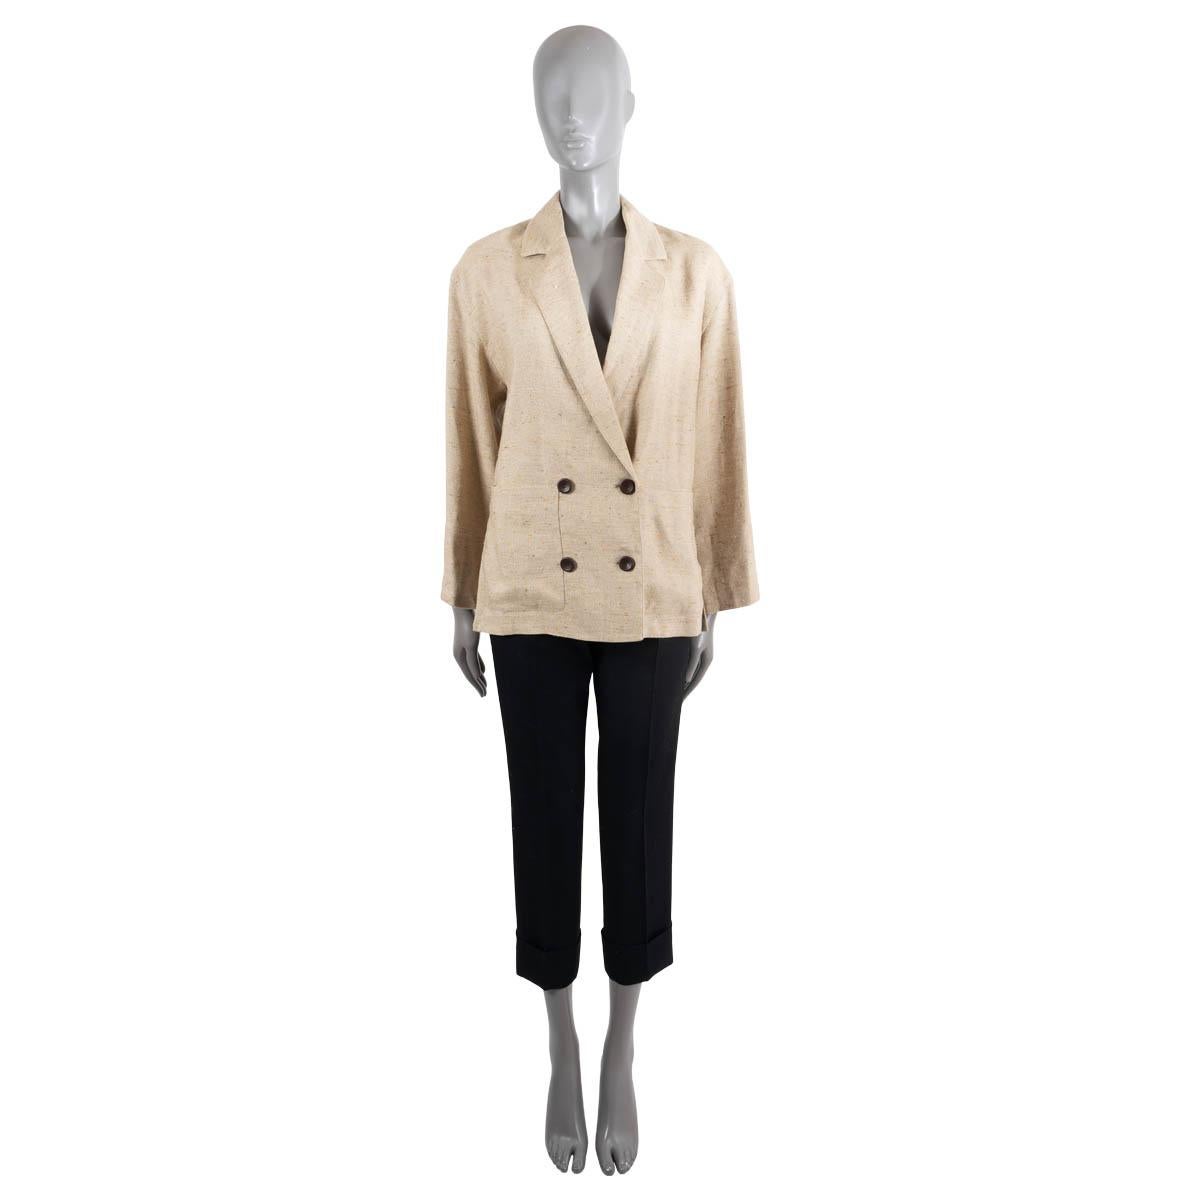 100% authentic Loro Piana Haye double-breasted blazer in beige linen (60%), cashmere (21%) and silk (19%). Features a relaxed fit with dropped shoulder, notched lapels and two patch pockets at the waist. Closes with chocolate brown buttons. Unlined.